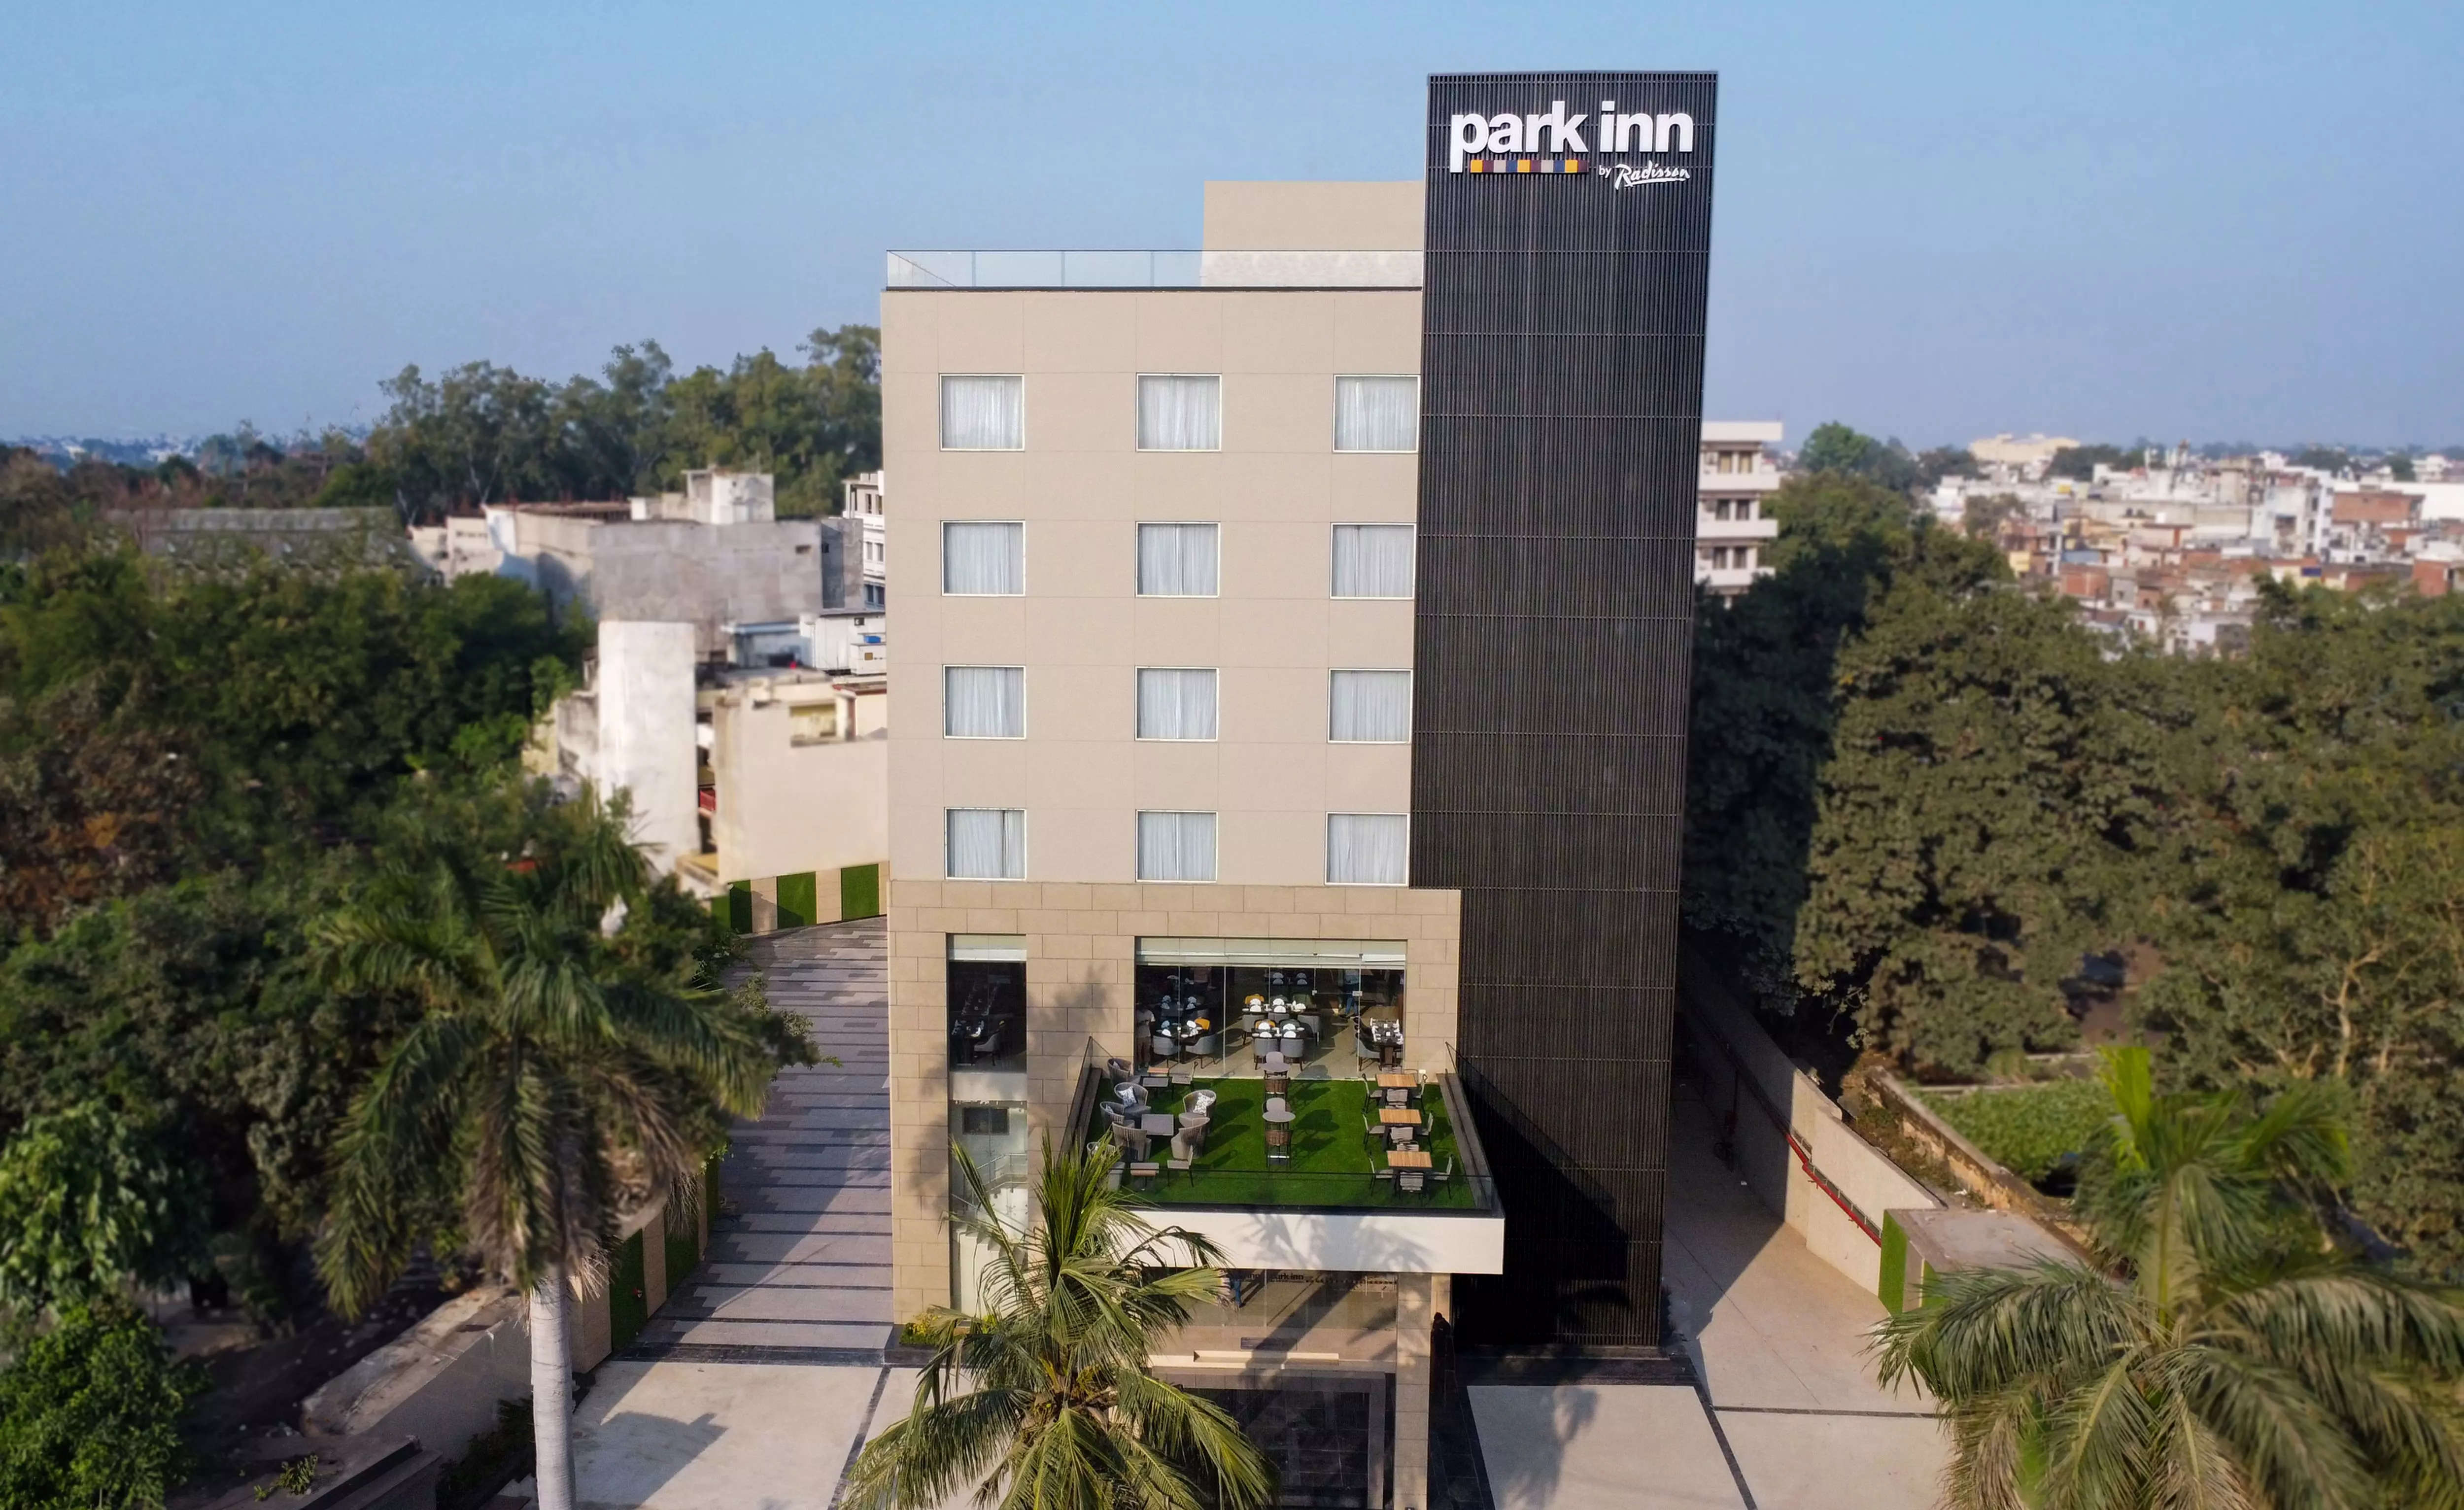 Radisson Hotel Group announces the opening of Park Inn by Radisson Ayodhya 